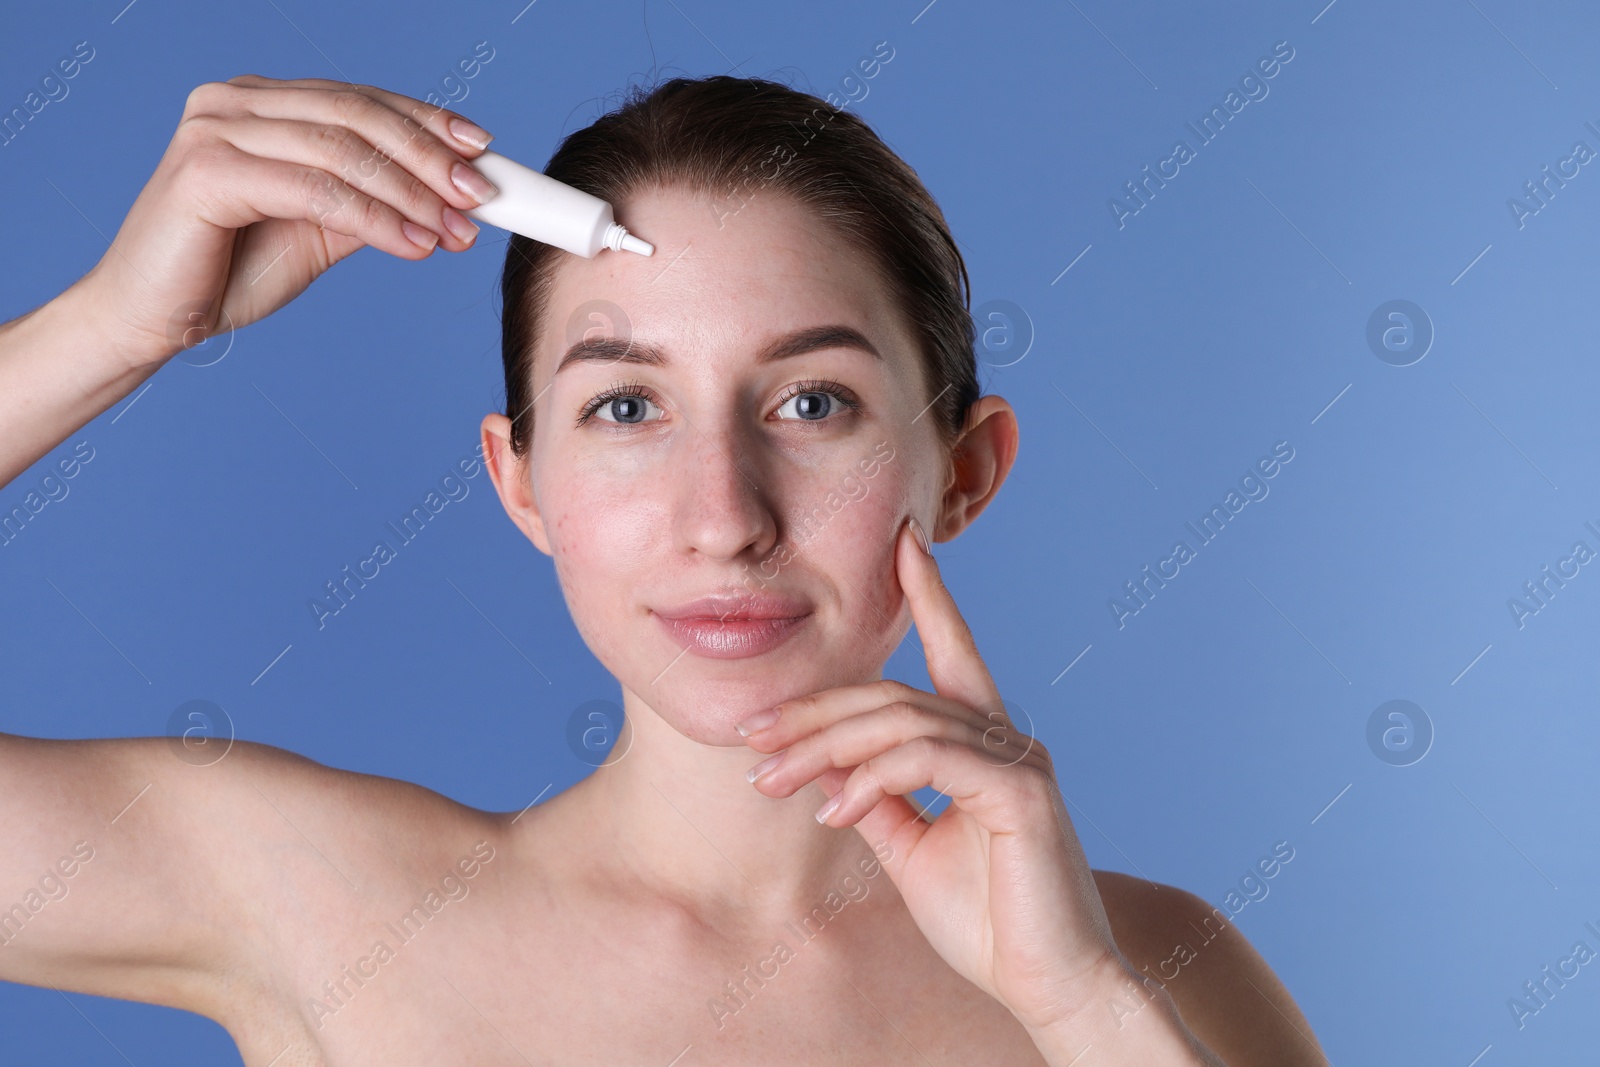 Photo of Young woman with acne problem applying cosmetic product onto her skin on blue background